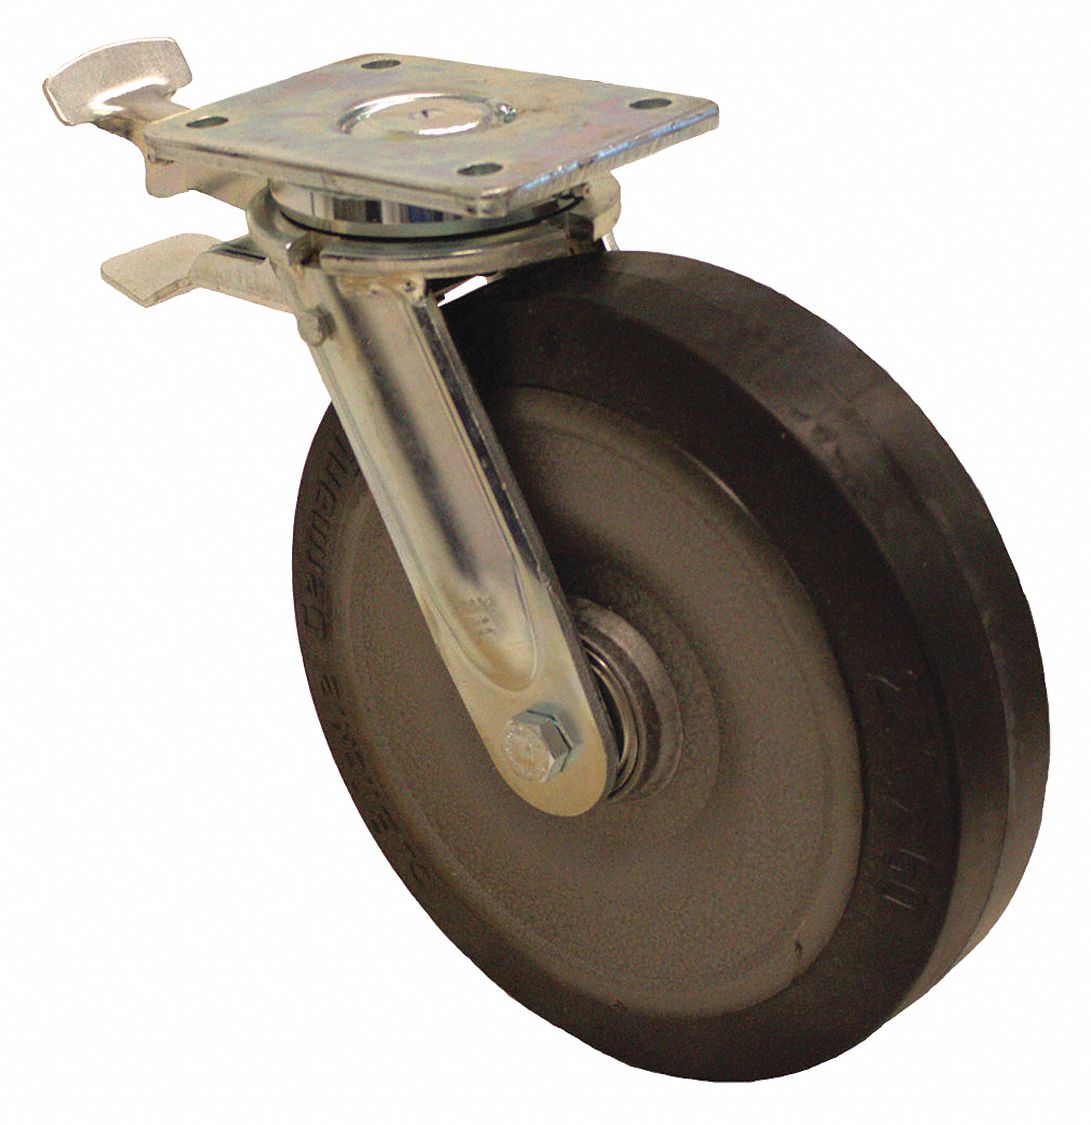 APPROVED VENDOR Standard Plate Caster: 9 13/16 in Wheel Dia., 1870 lb, 11  5/8 in Mounting Ht, Rubber